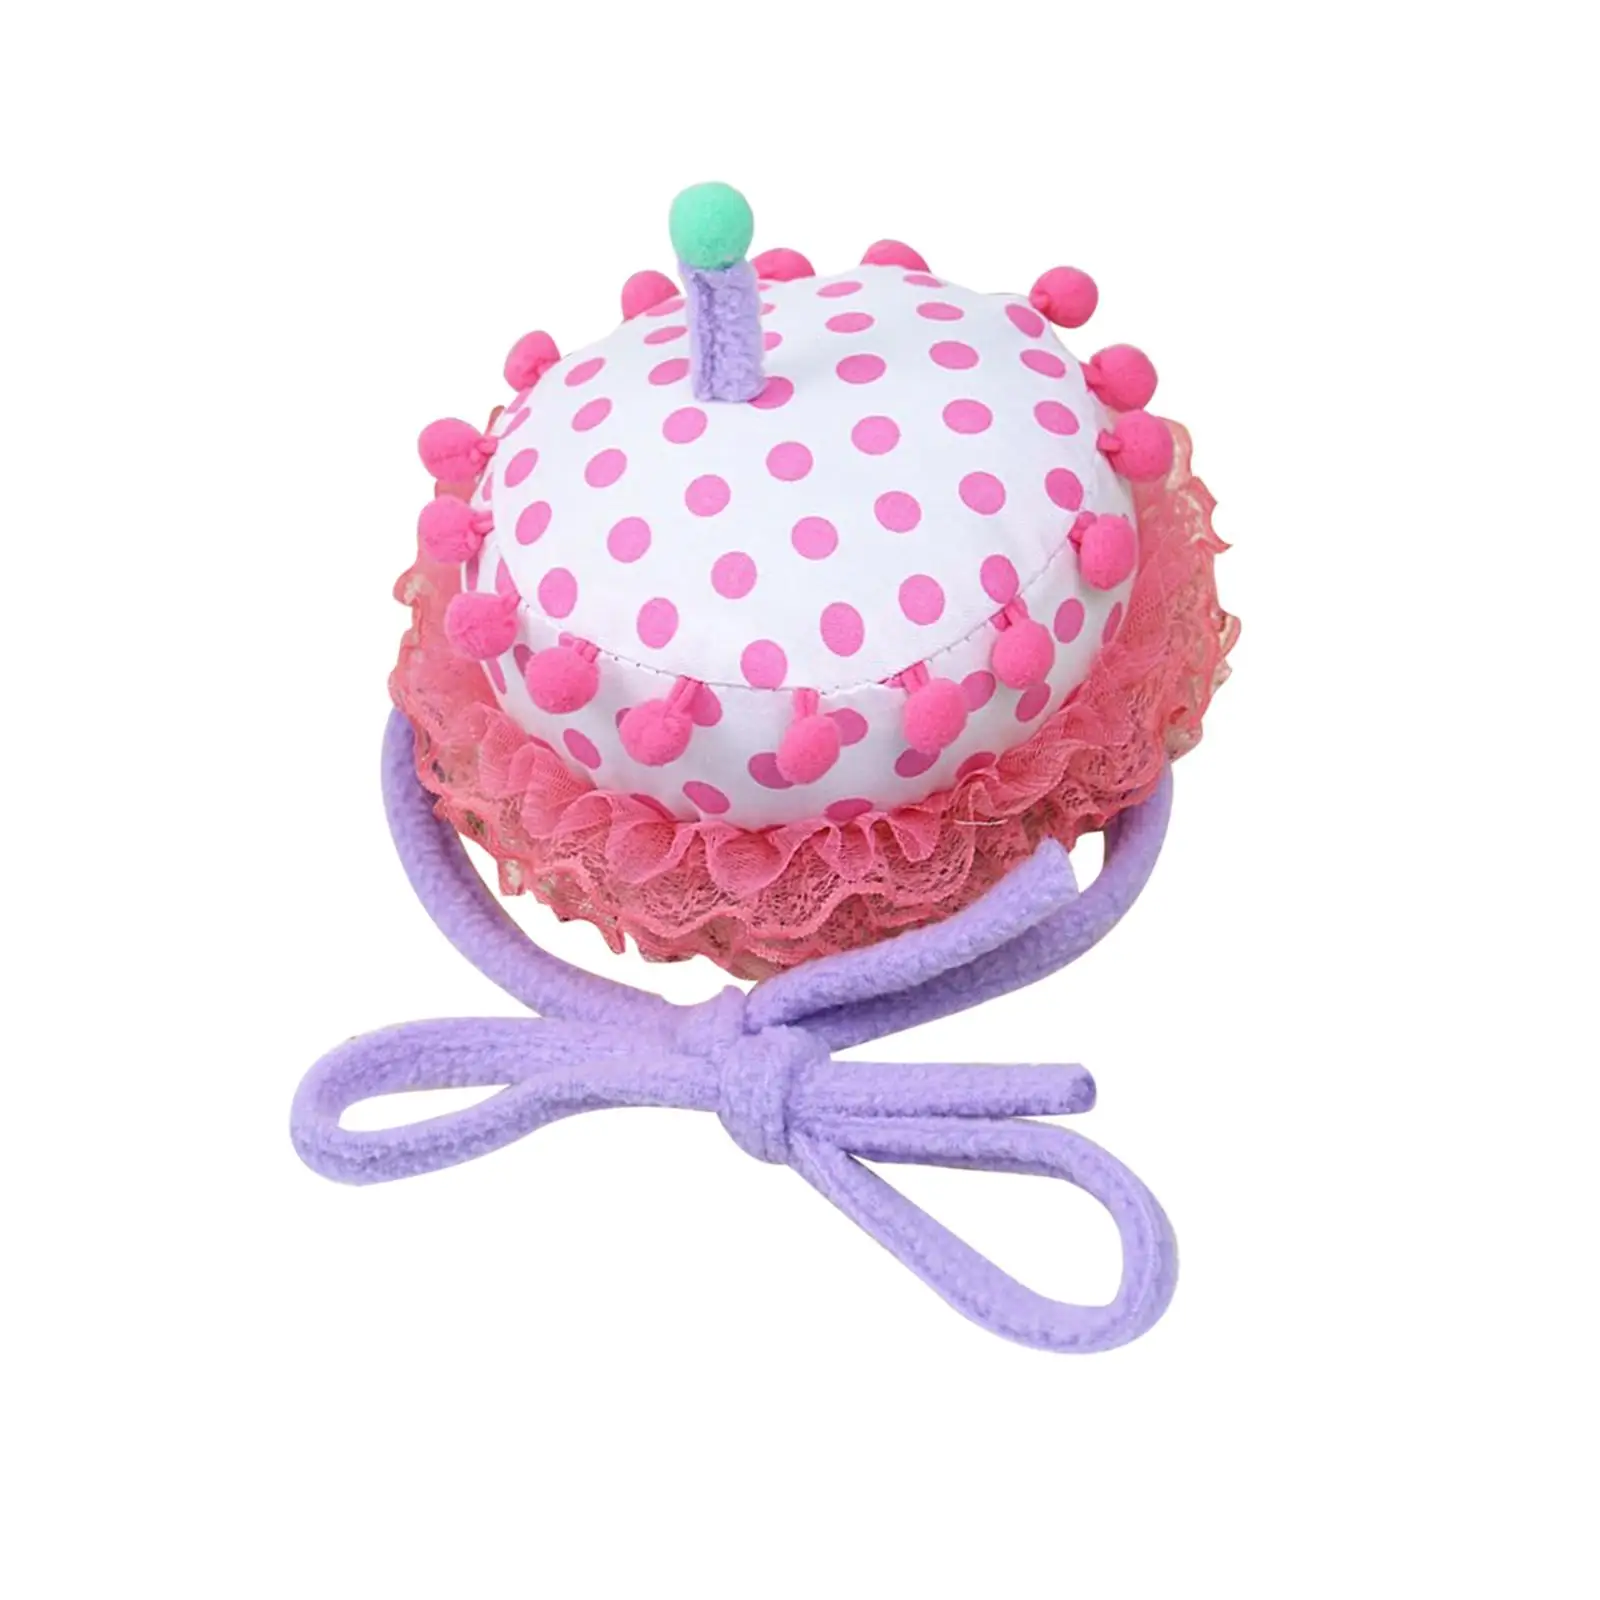 Cute Happy Birthday cakes top Hat Washable for Small Medium Dogs Kids Kitten